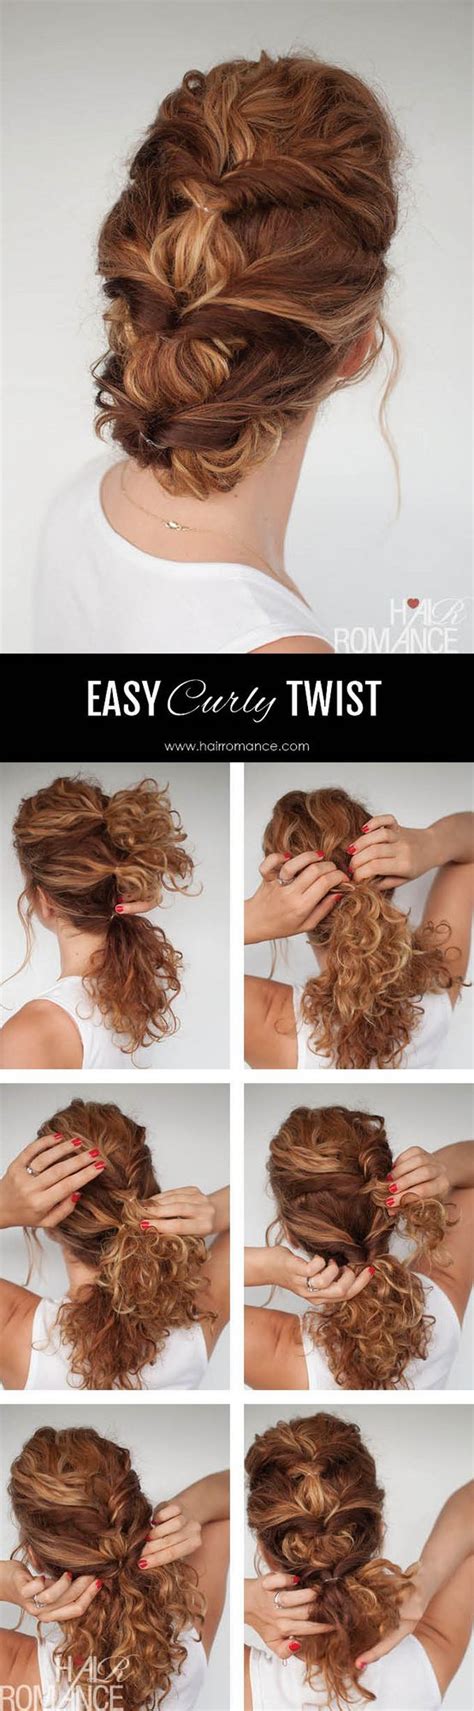 Easy Everyday Curly Hairstyle Tutorial The Curly Twist Hair Romance